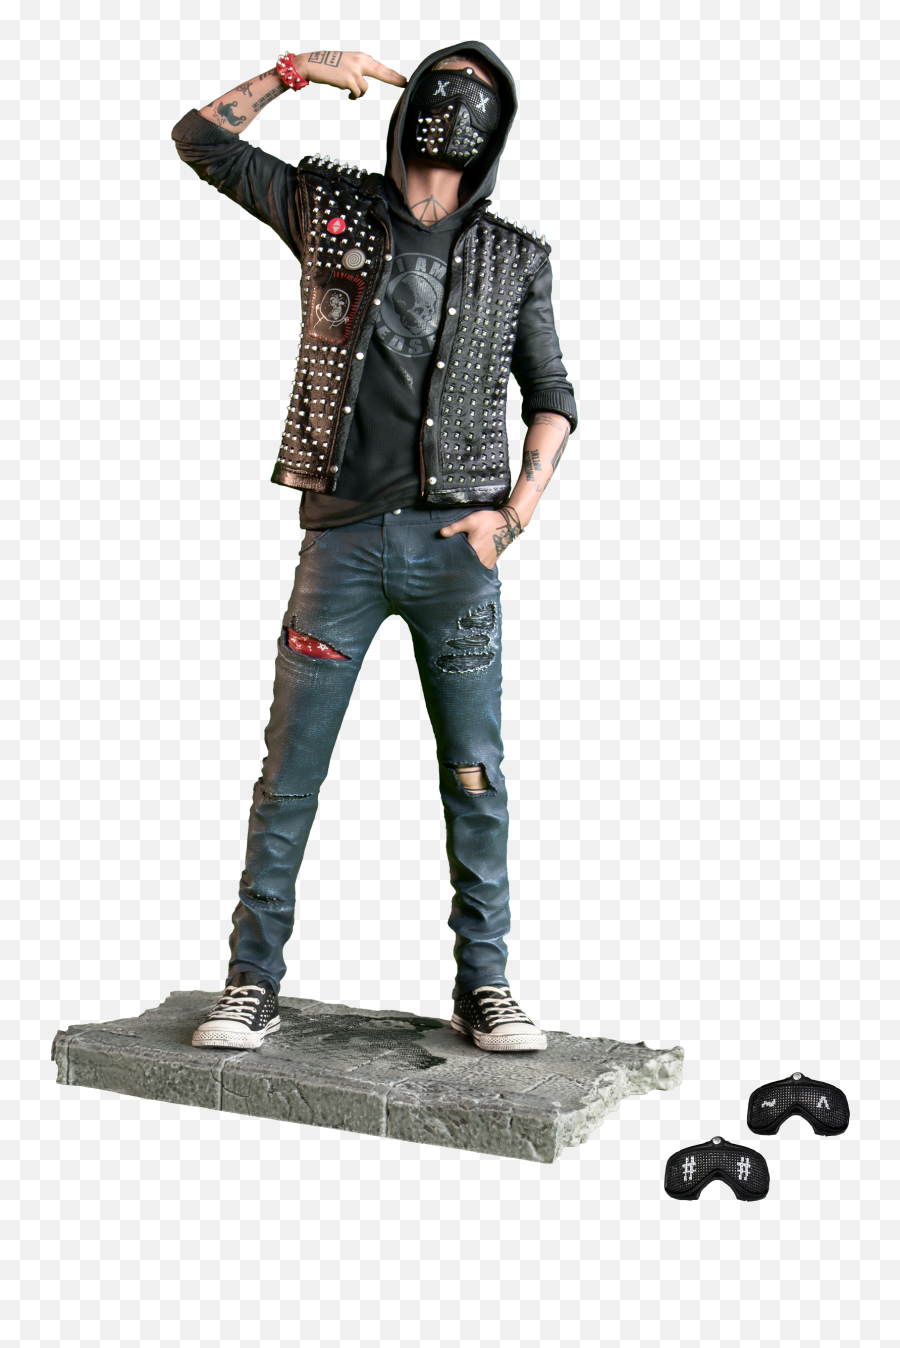 The Wrench - Watch Dogs Wrench Figure Emoji,Wrench Emotions